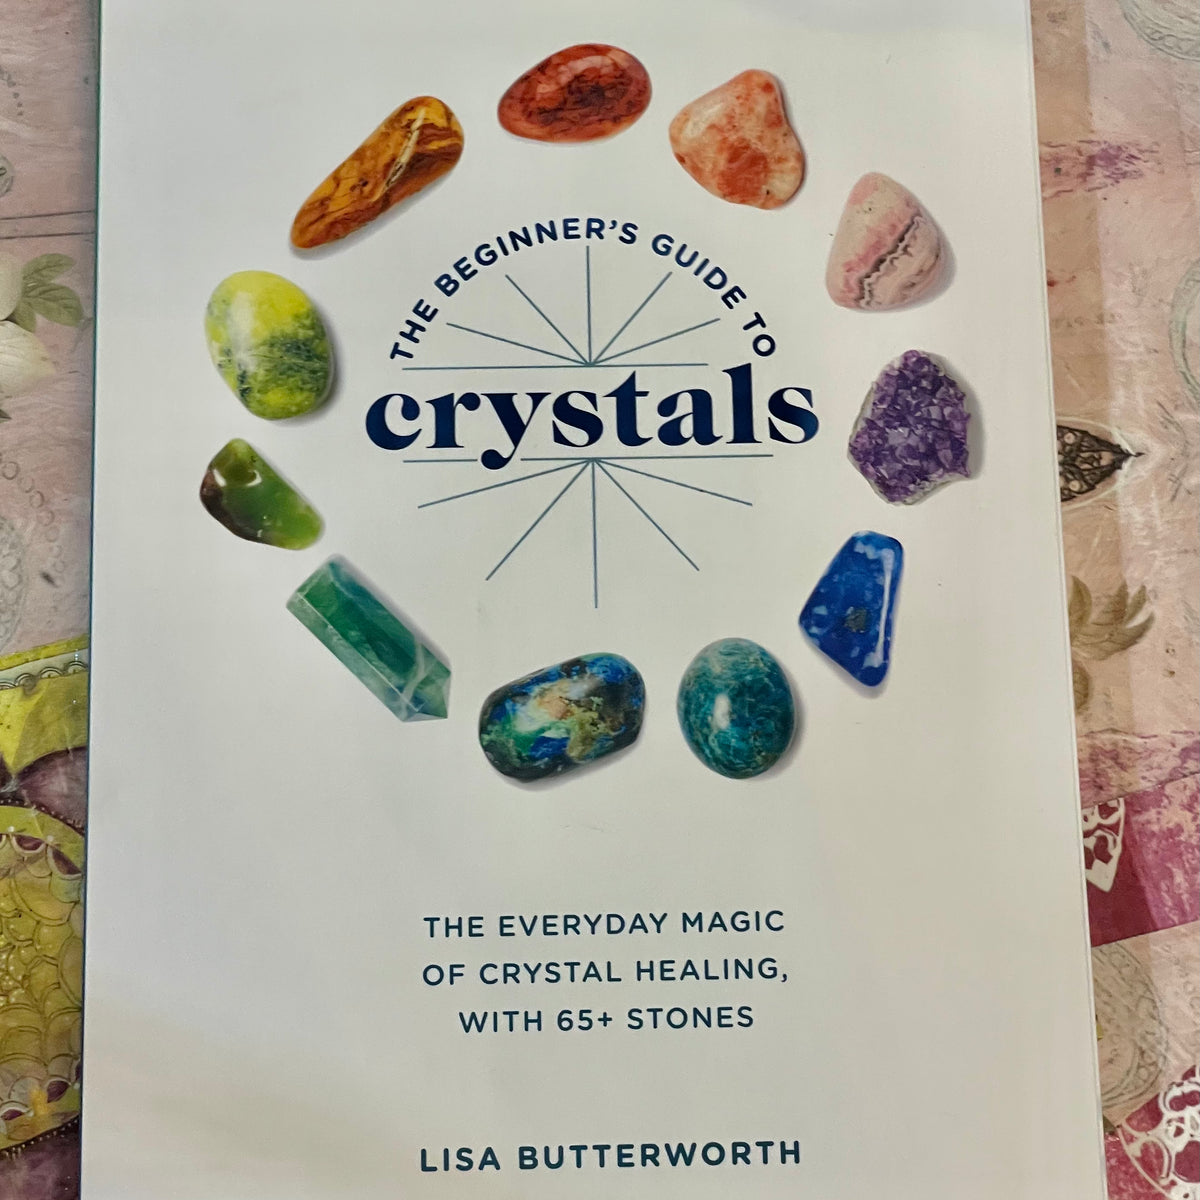 The Beginner’s Guide to Crystals